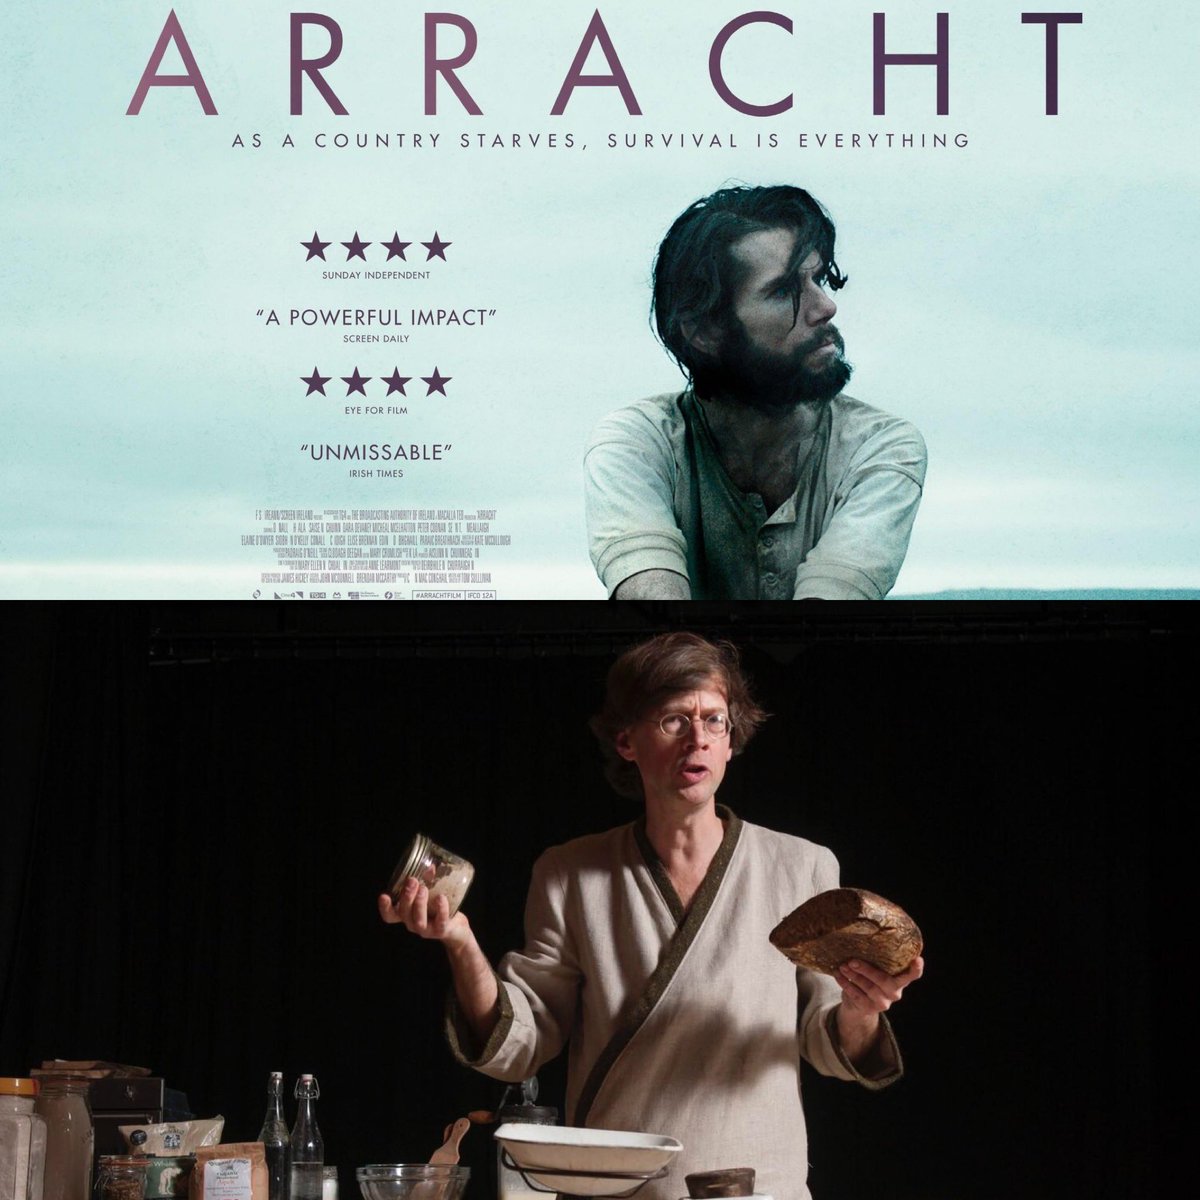 Hey gaeilgeoirs, there are plenty of Irish-language events happening in NYC this weekend! @IrishArtsCenter’s Féile na Gaeilge will feature a staging of ‘Arán & Im’ by @ManchanMagan, as well as a screening of the award-winning film ‘Arracht’. ☘️: irishartscenter.org/event/feile-na…